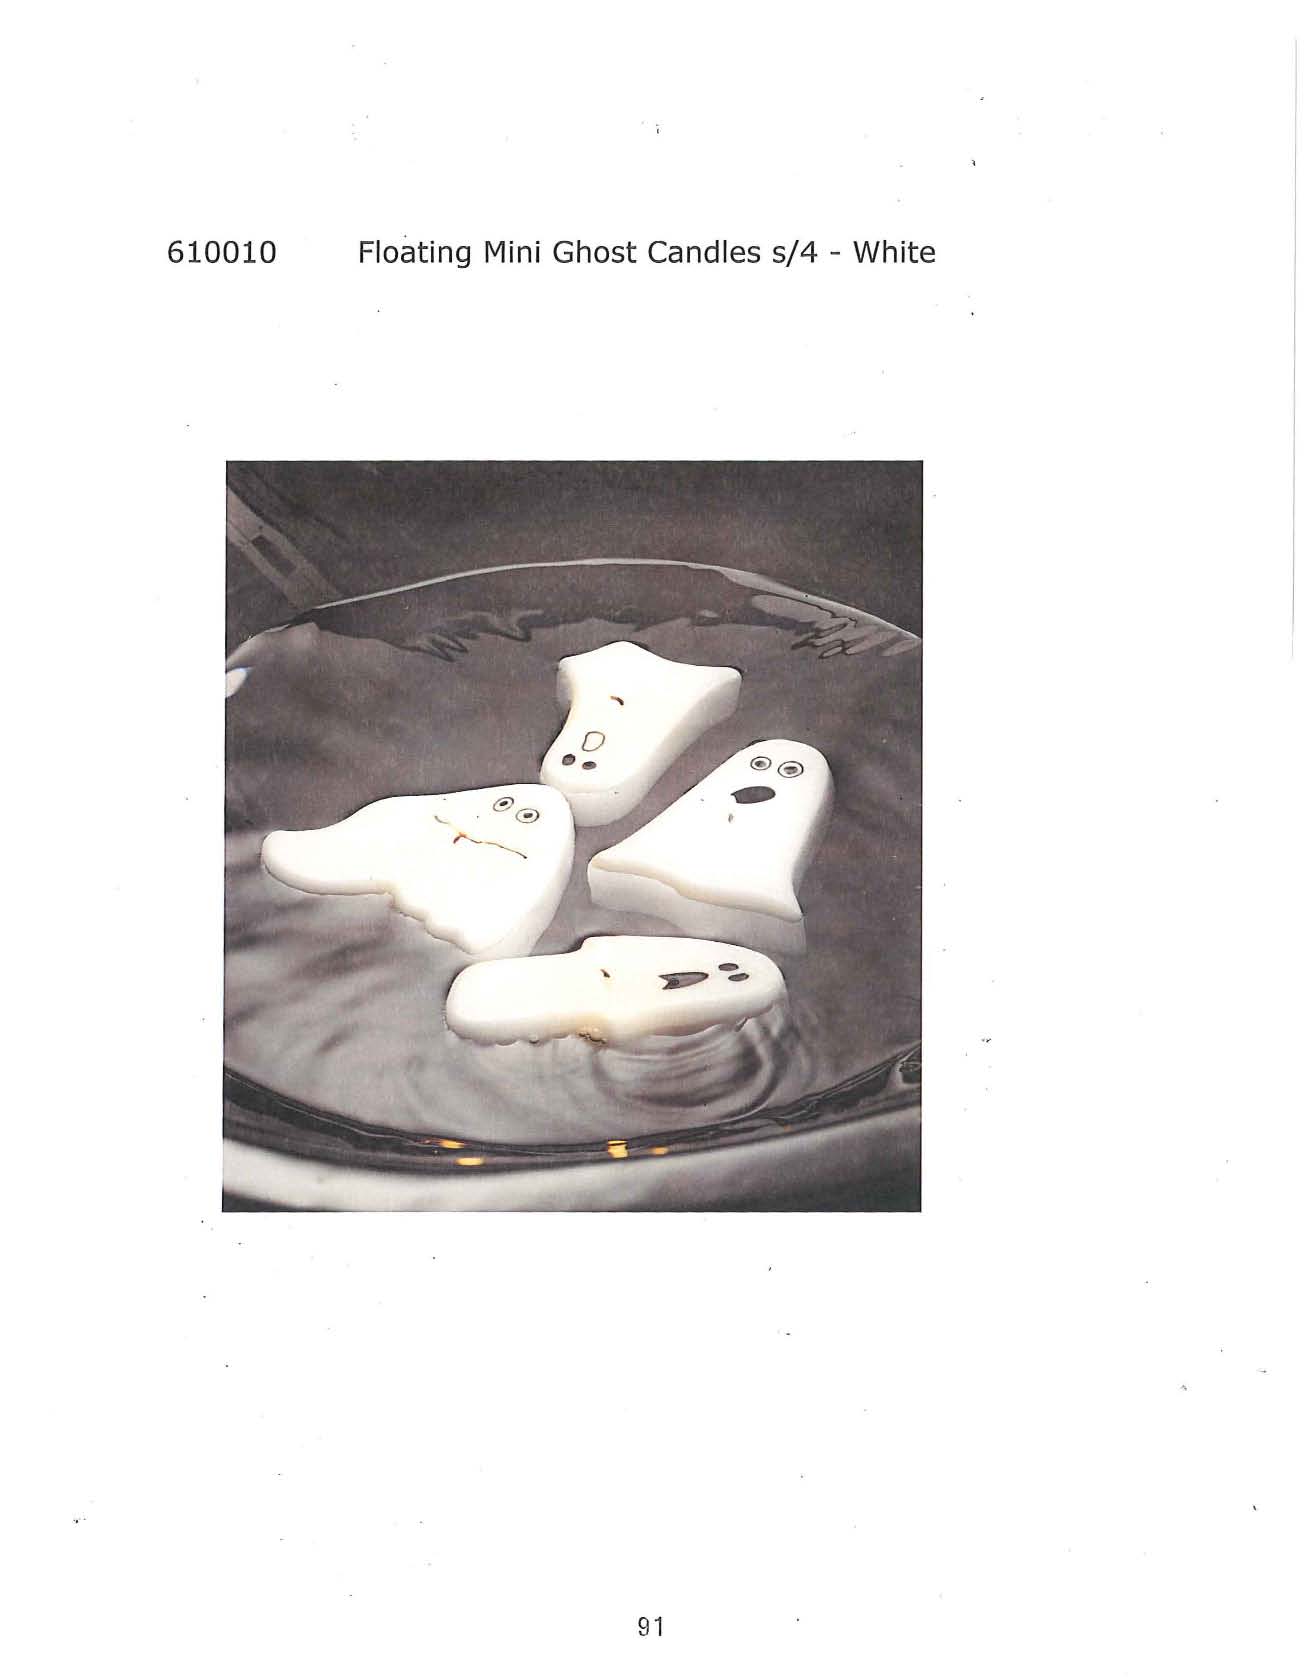 Floating Mini Ghost Candle s/4 - White